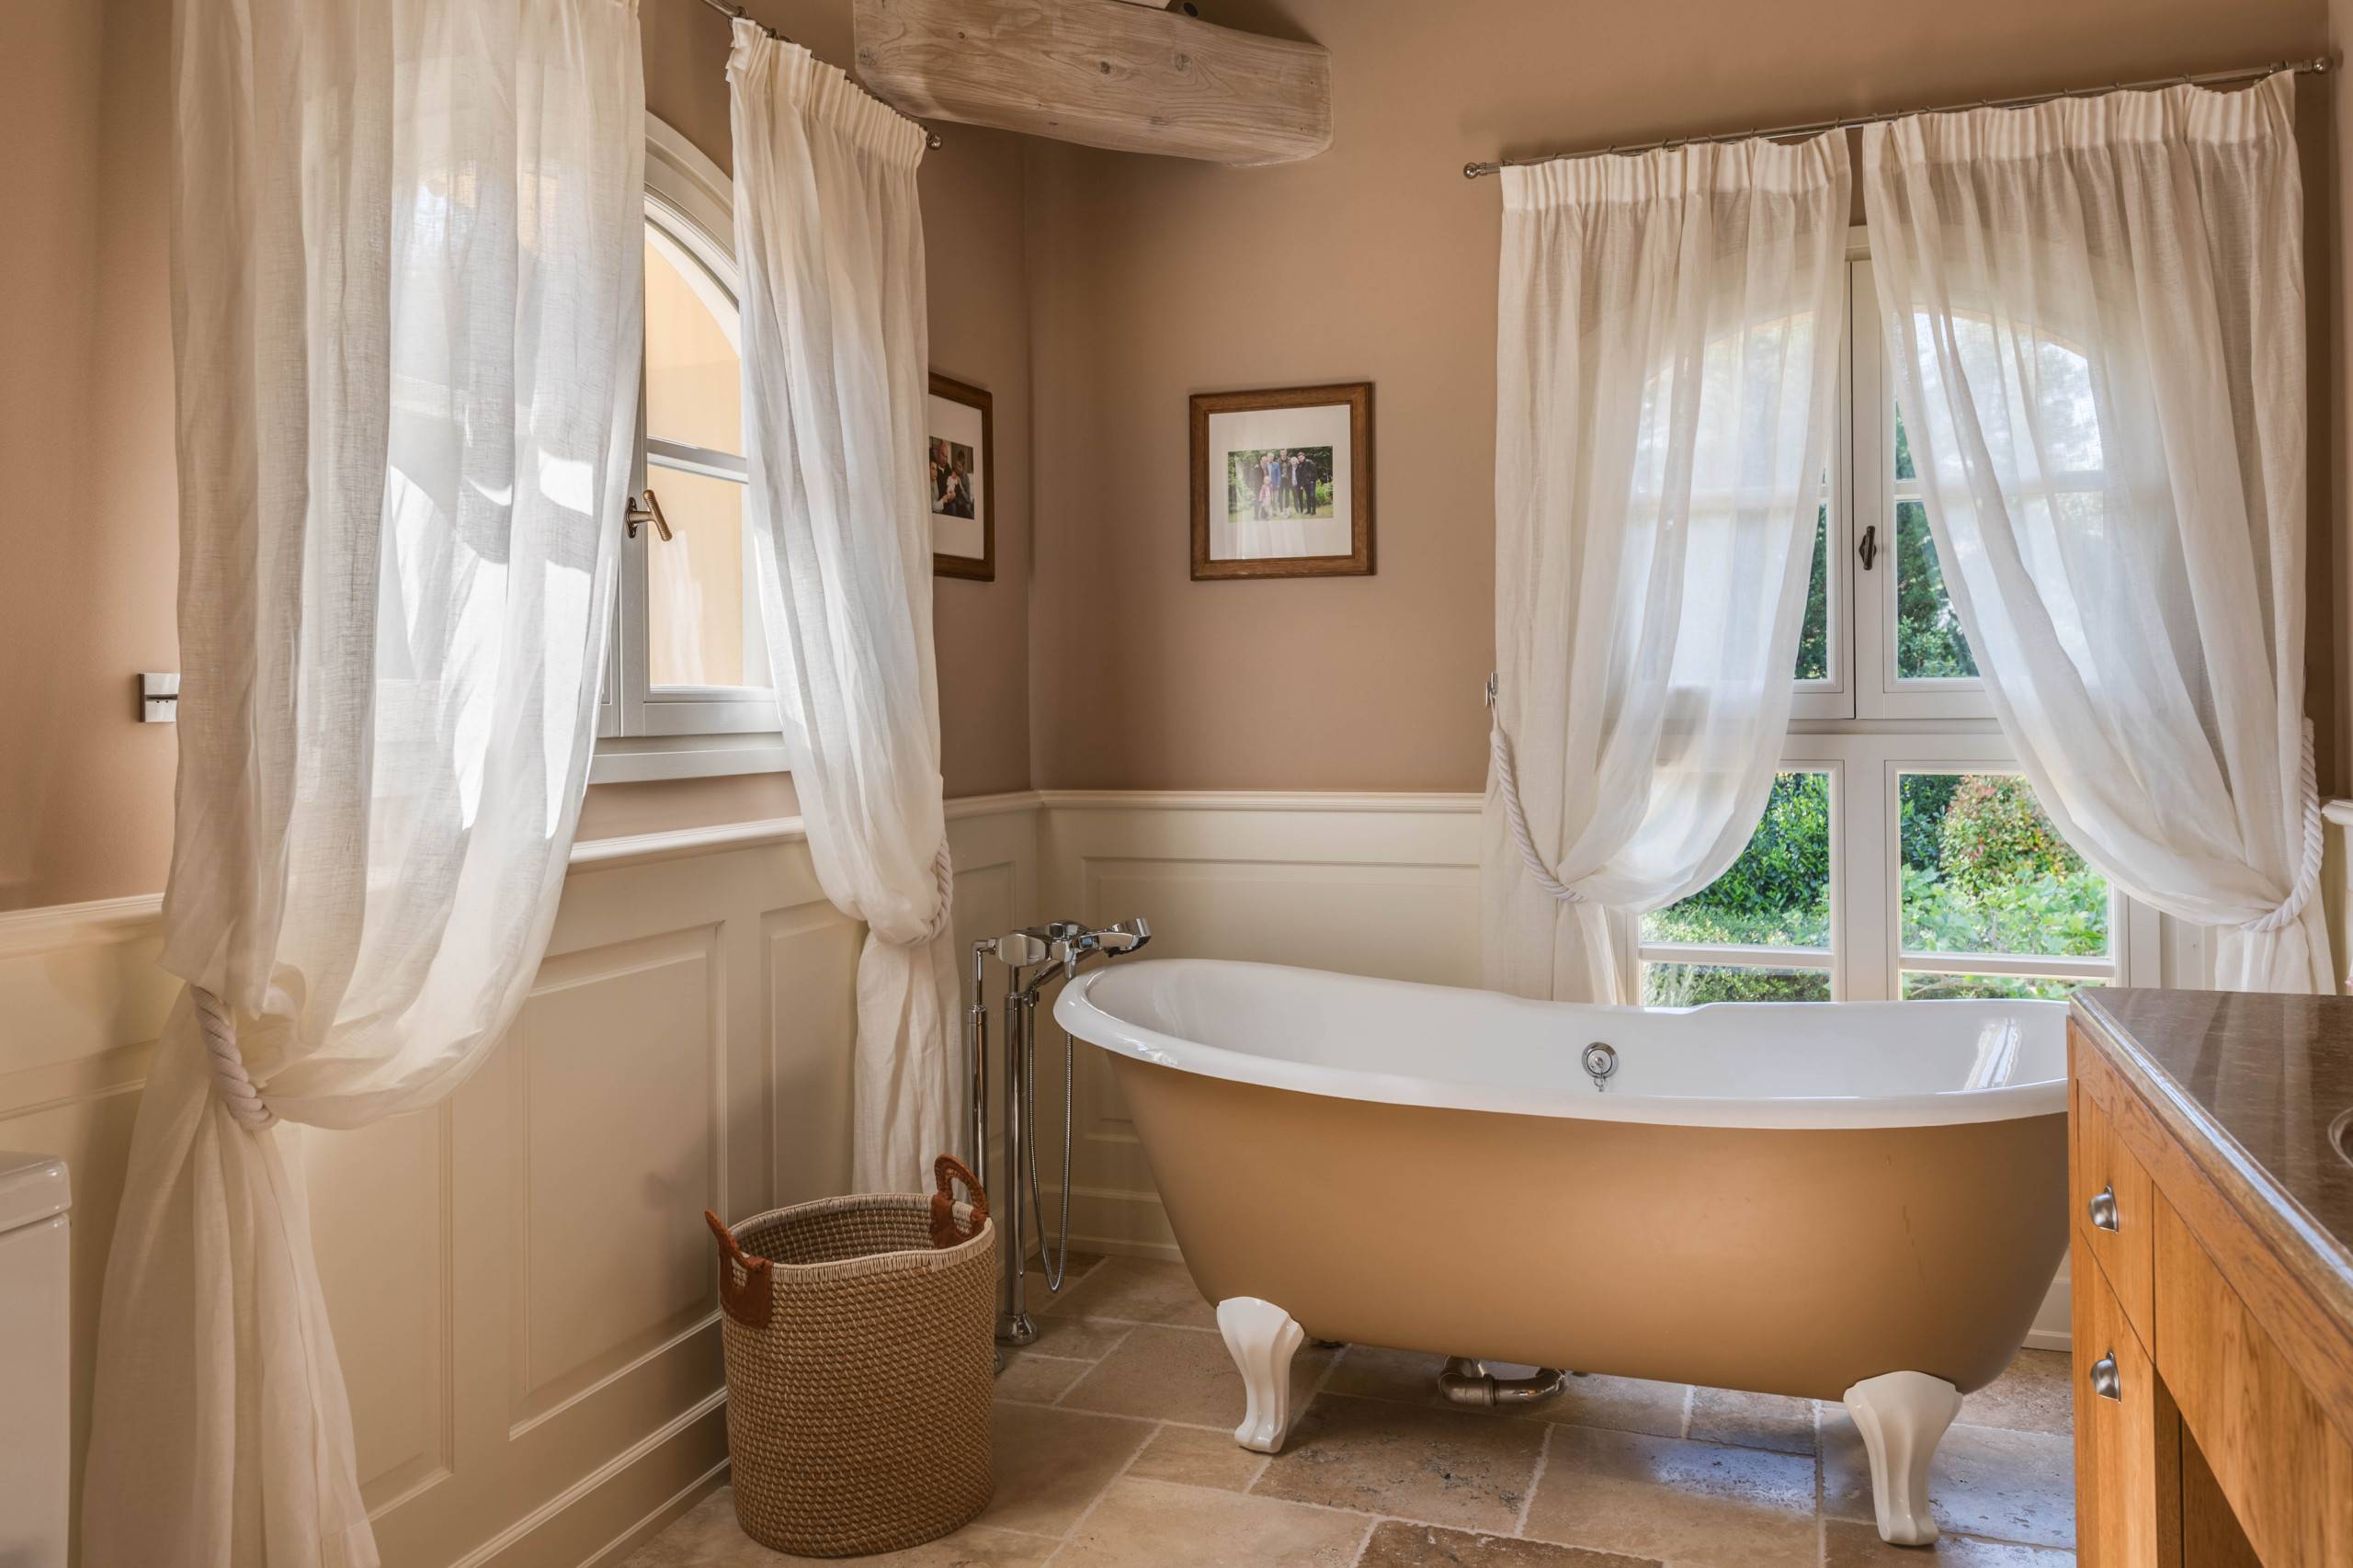 Dreamy curtains (from Houzz)